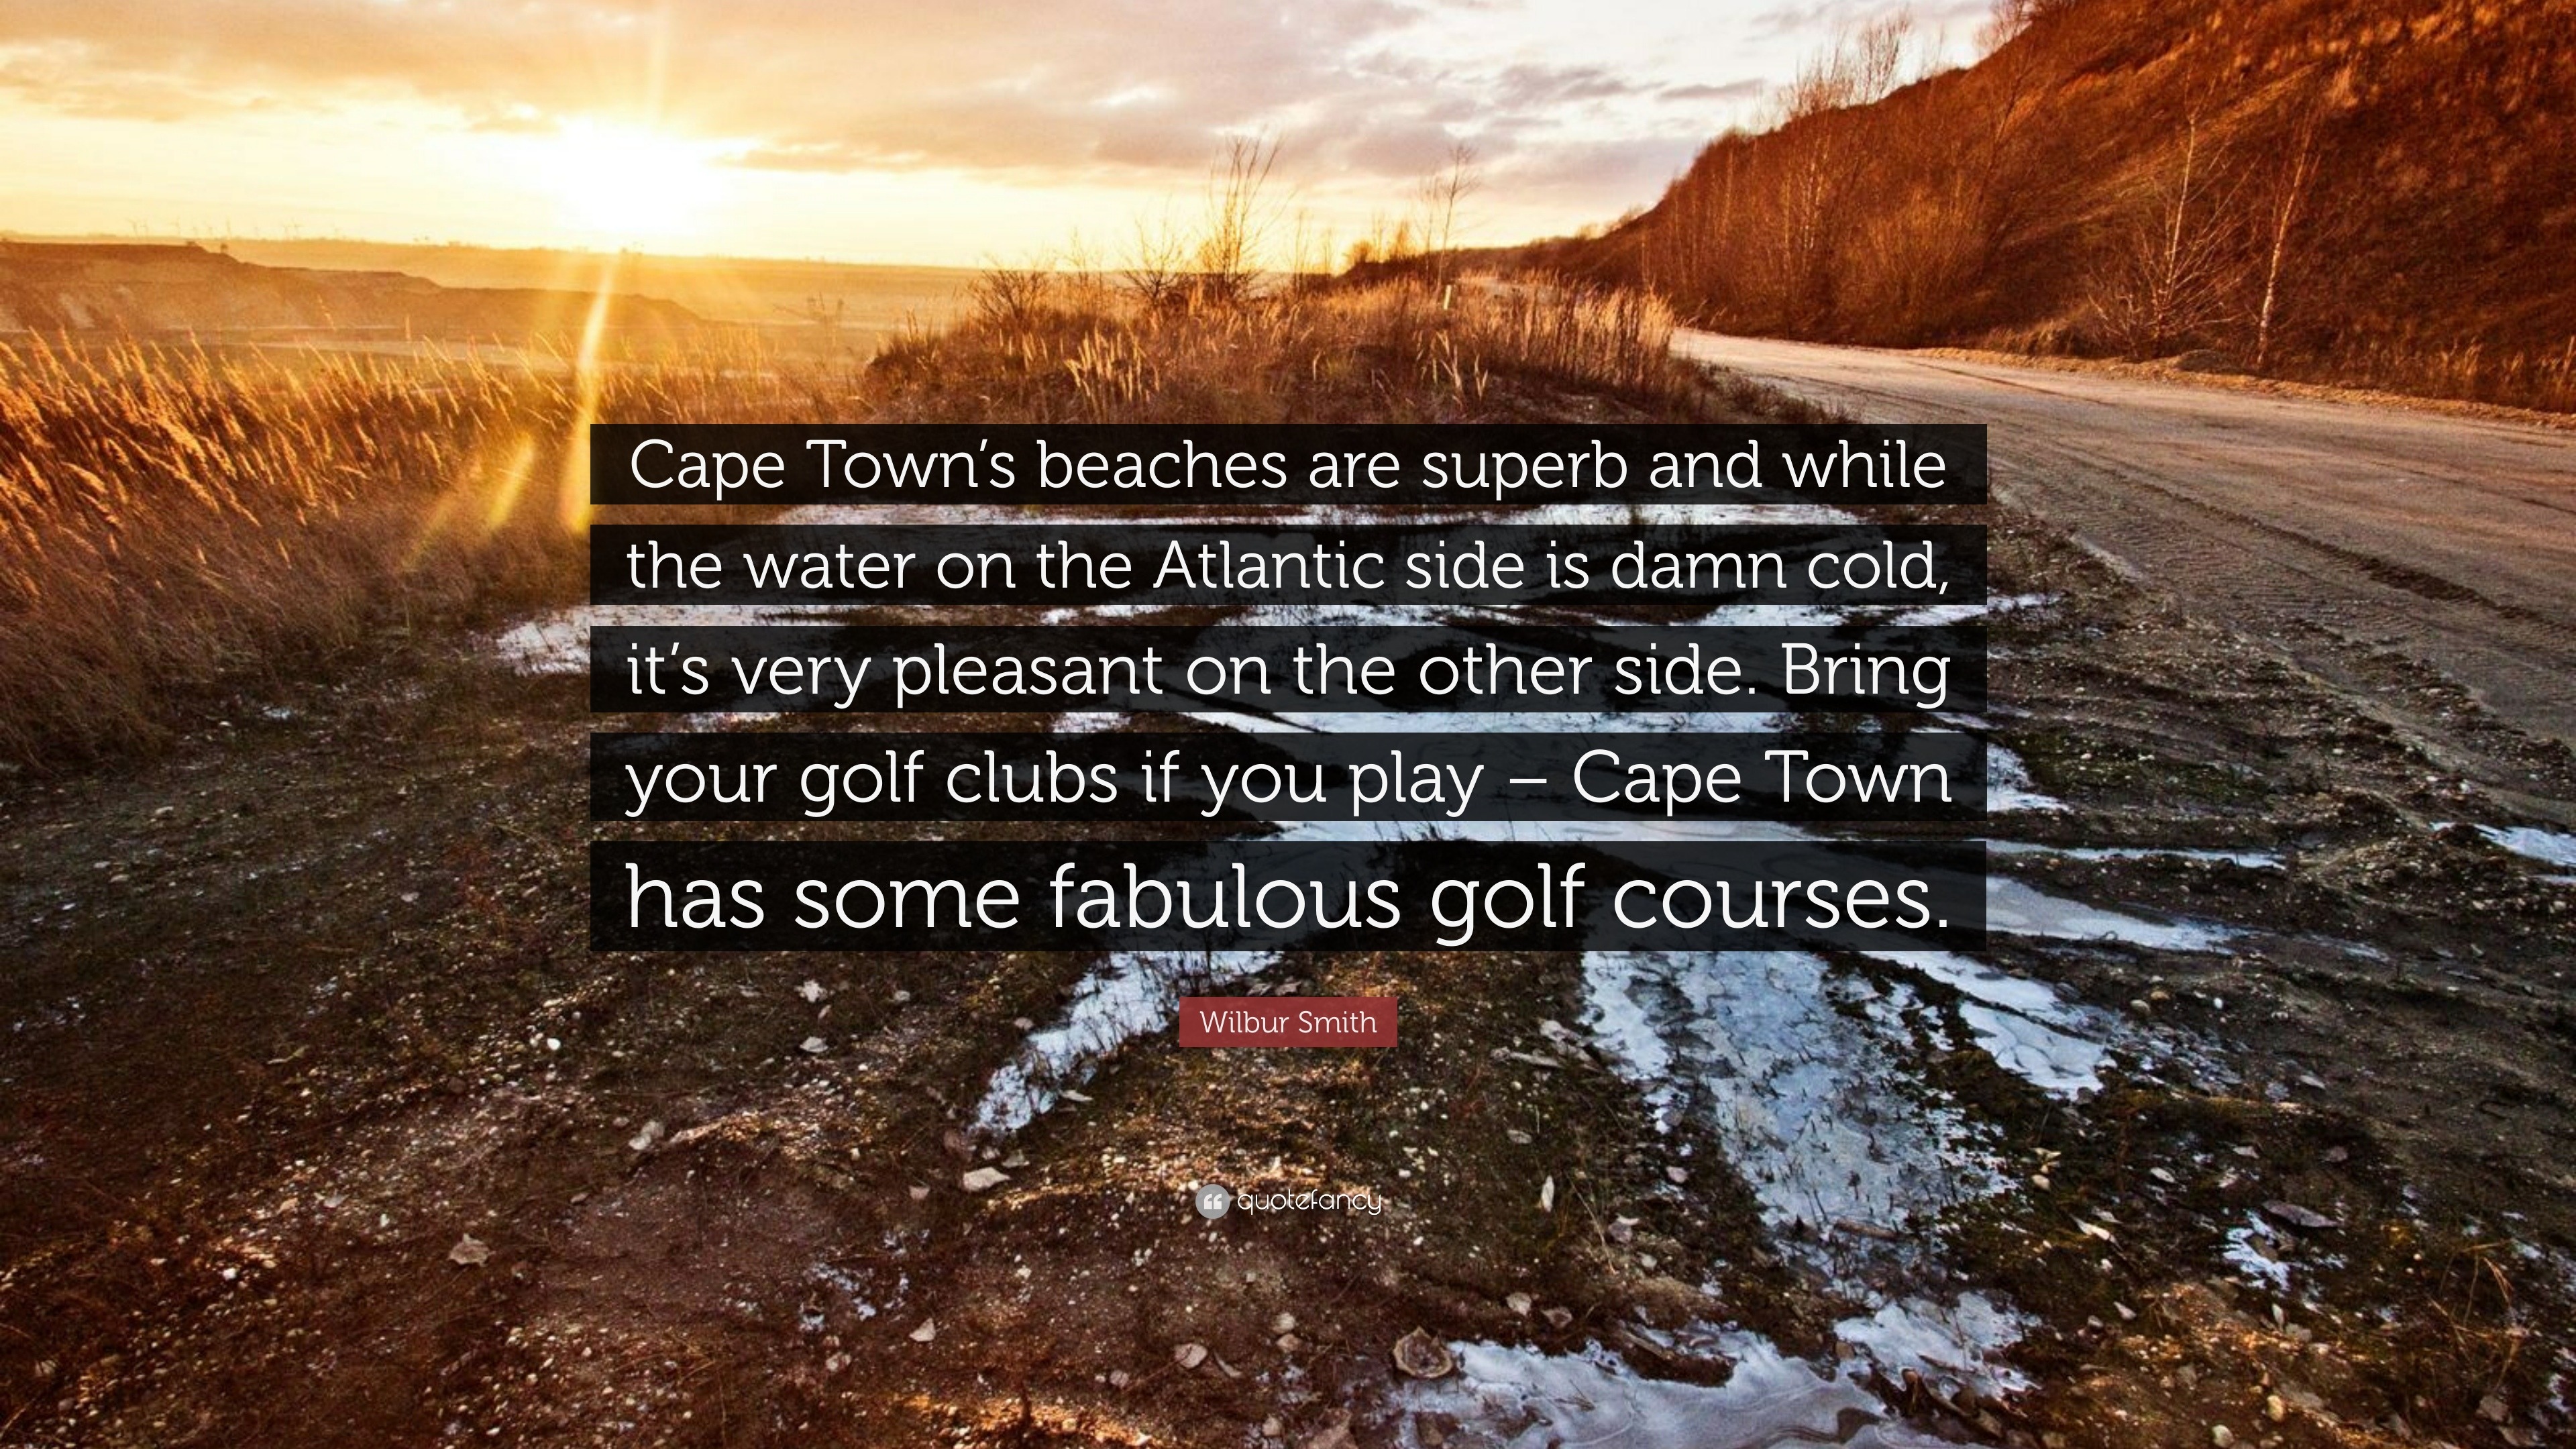 Wilbur Smith Quote “cape Town’s Beaches Are Superb And While The Water On The Atlantic Side Is